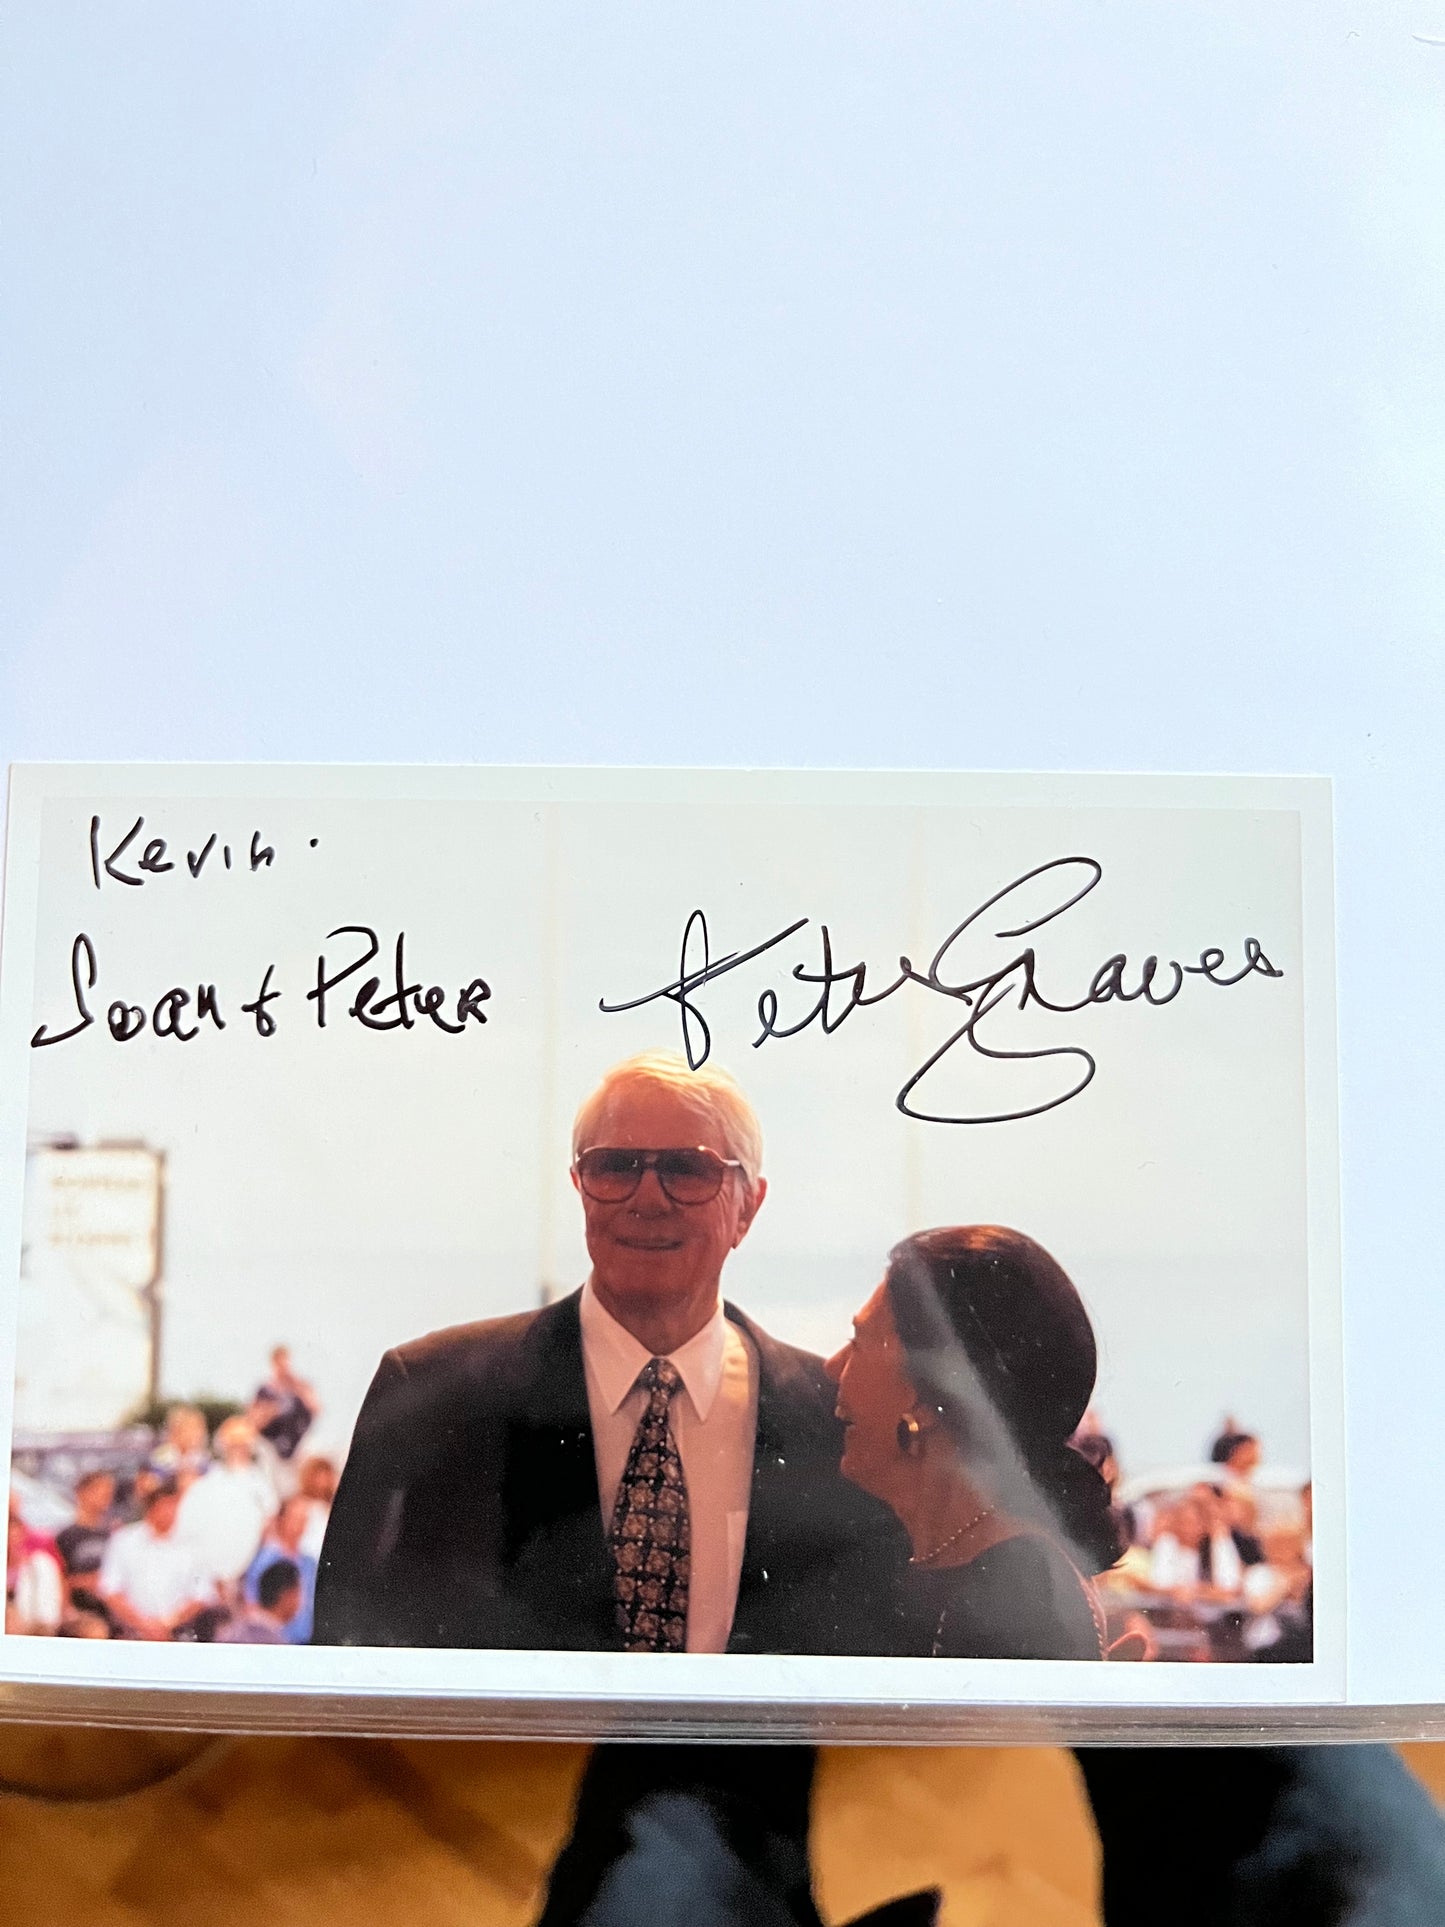 PETER GRAVES, Mission Impossible, Airplane, autograph